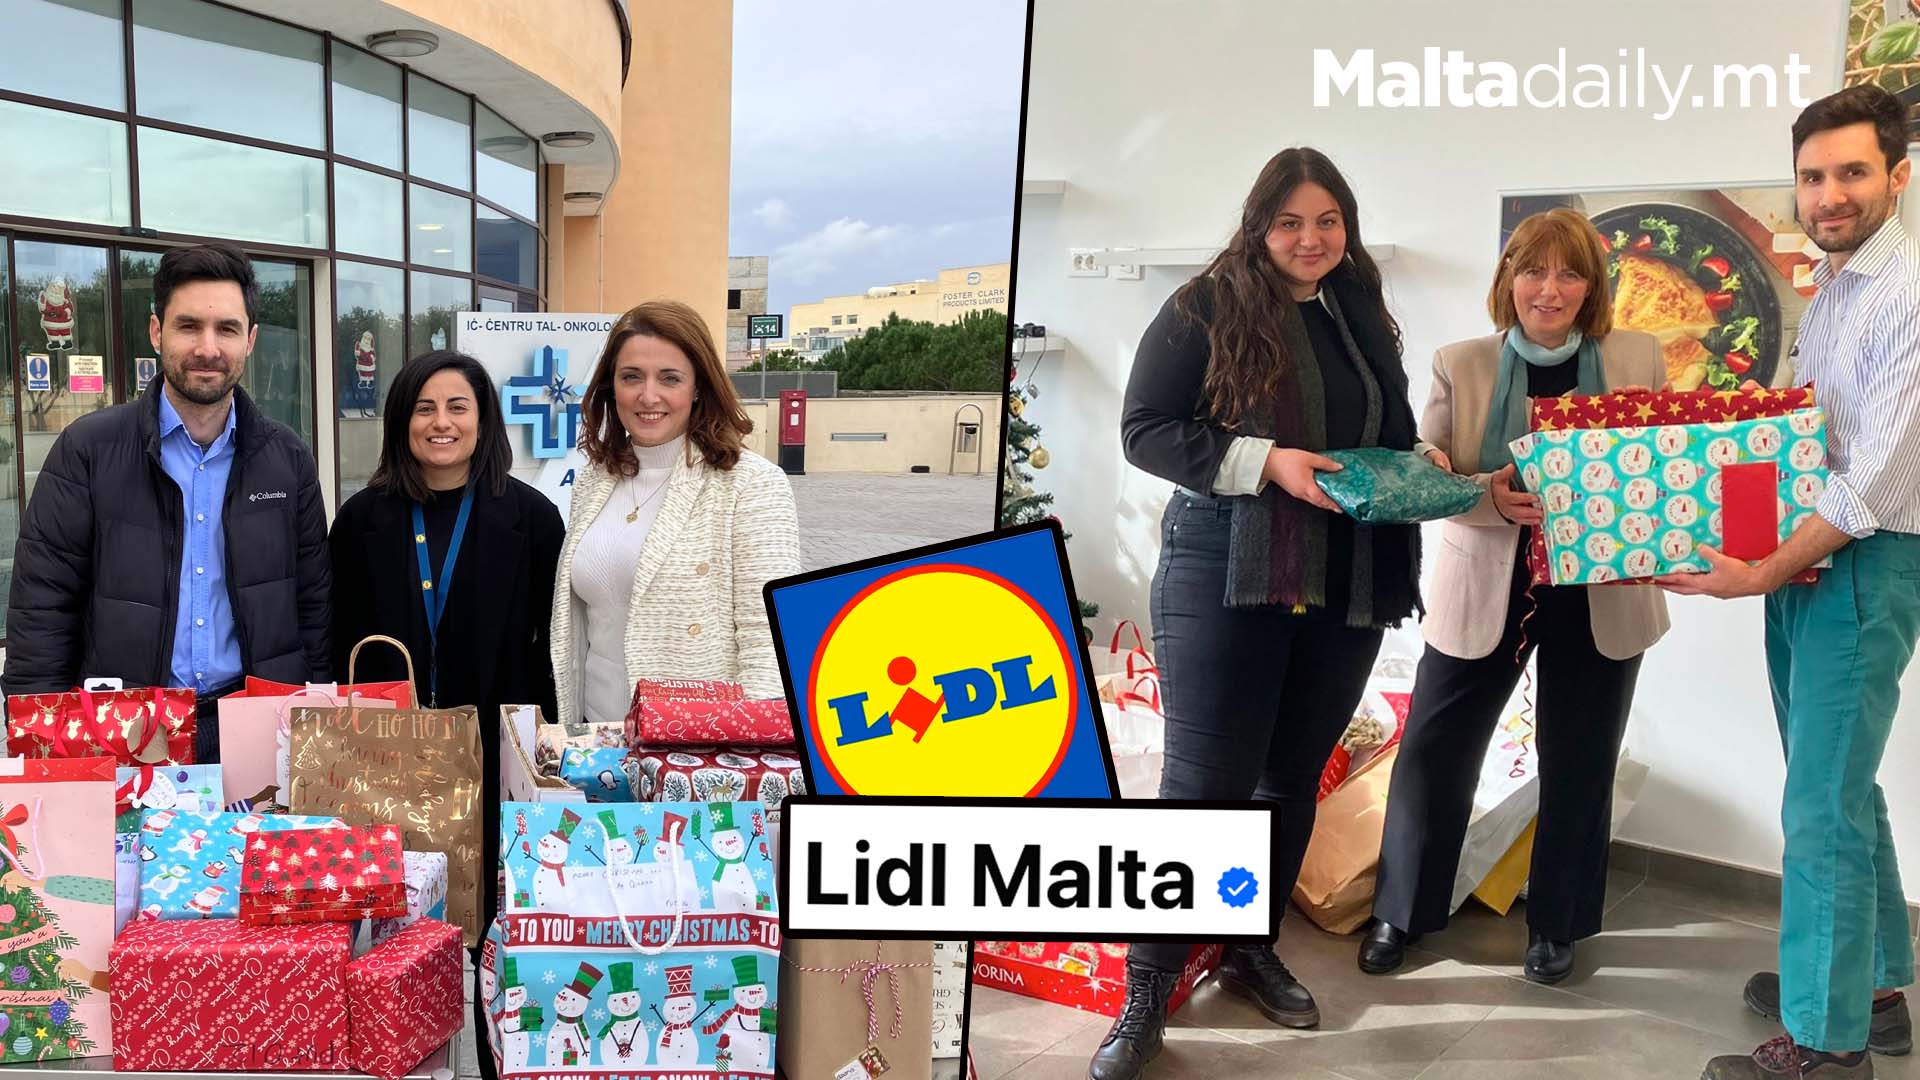 Lidl Malta Buys 260 Gifts From Child Patient Wishlist